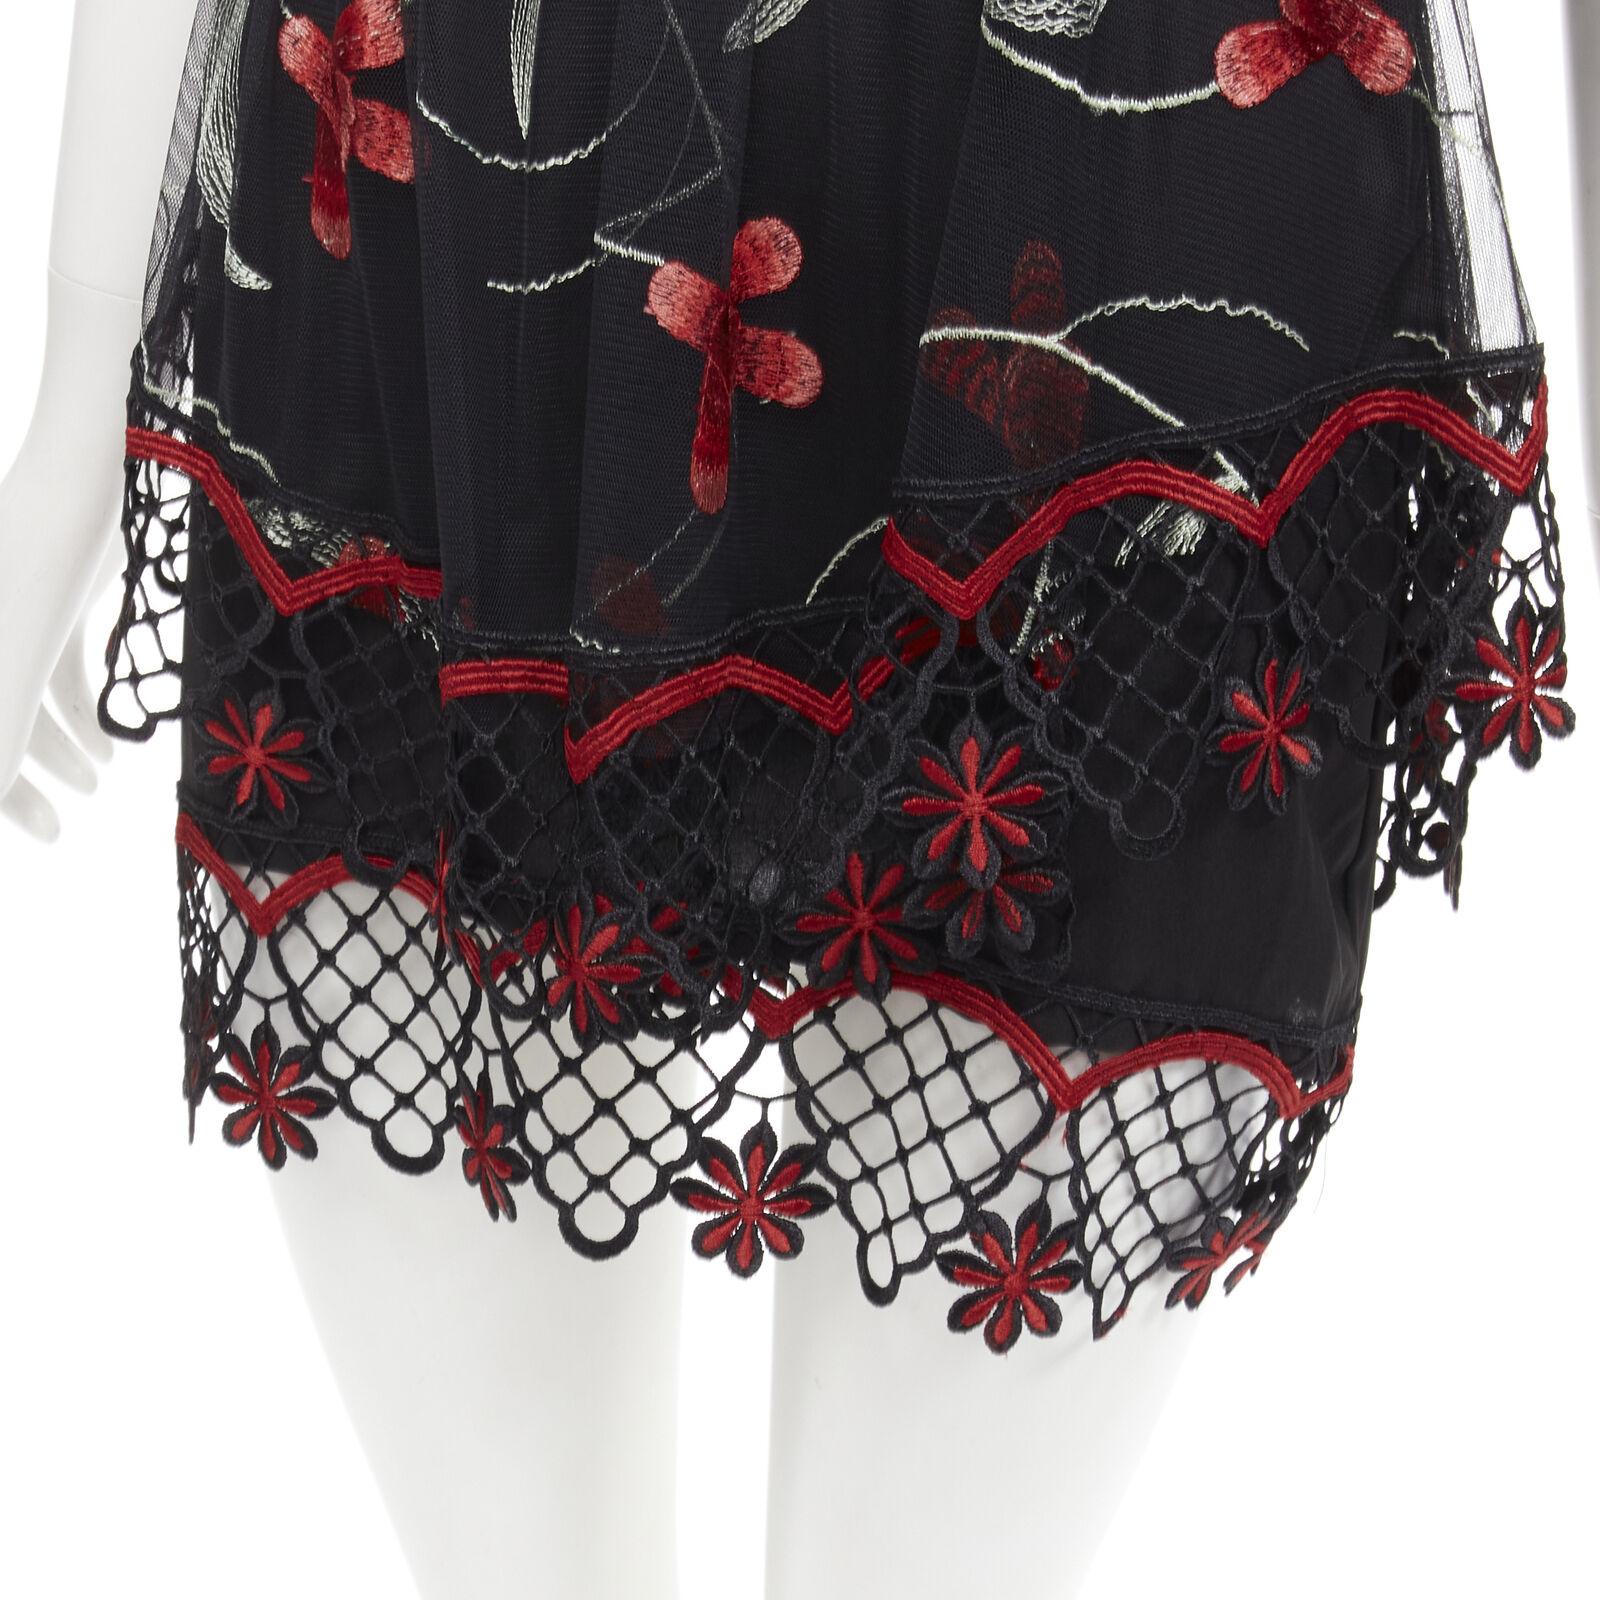 ALICE MCCALL Wish you Were Here black red guipere lace floral tulle dress US2 XS
Reference: AAWC/A00168
Brand: Alice McCall
Model: Wish You Were Here
Color: Black, Red
Pattern: Floral
Closure: Zip
Lining: Fully Lined
Extra Details: Black sheer tulle